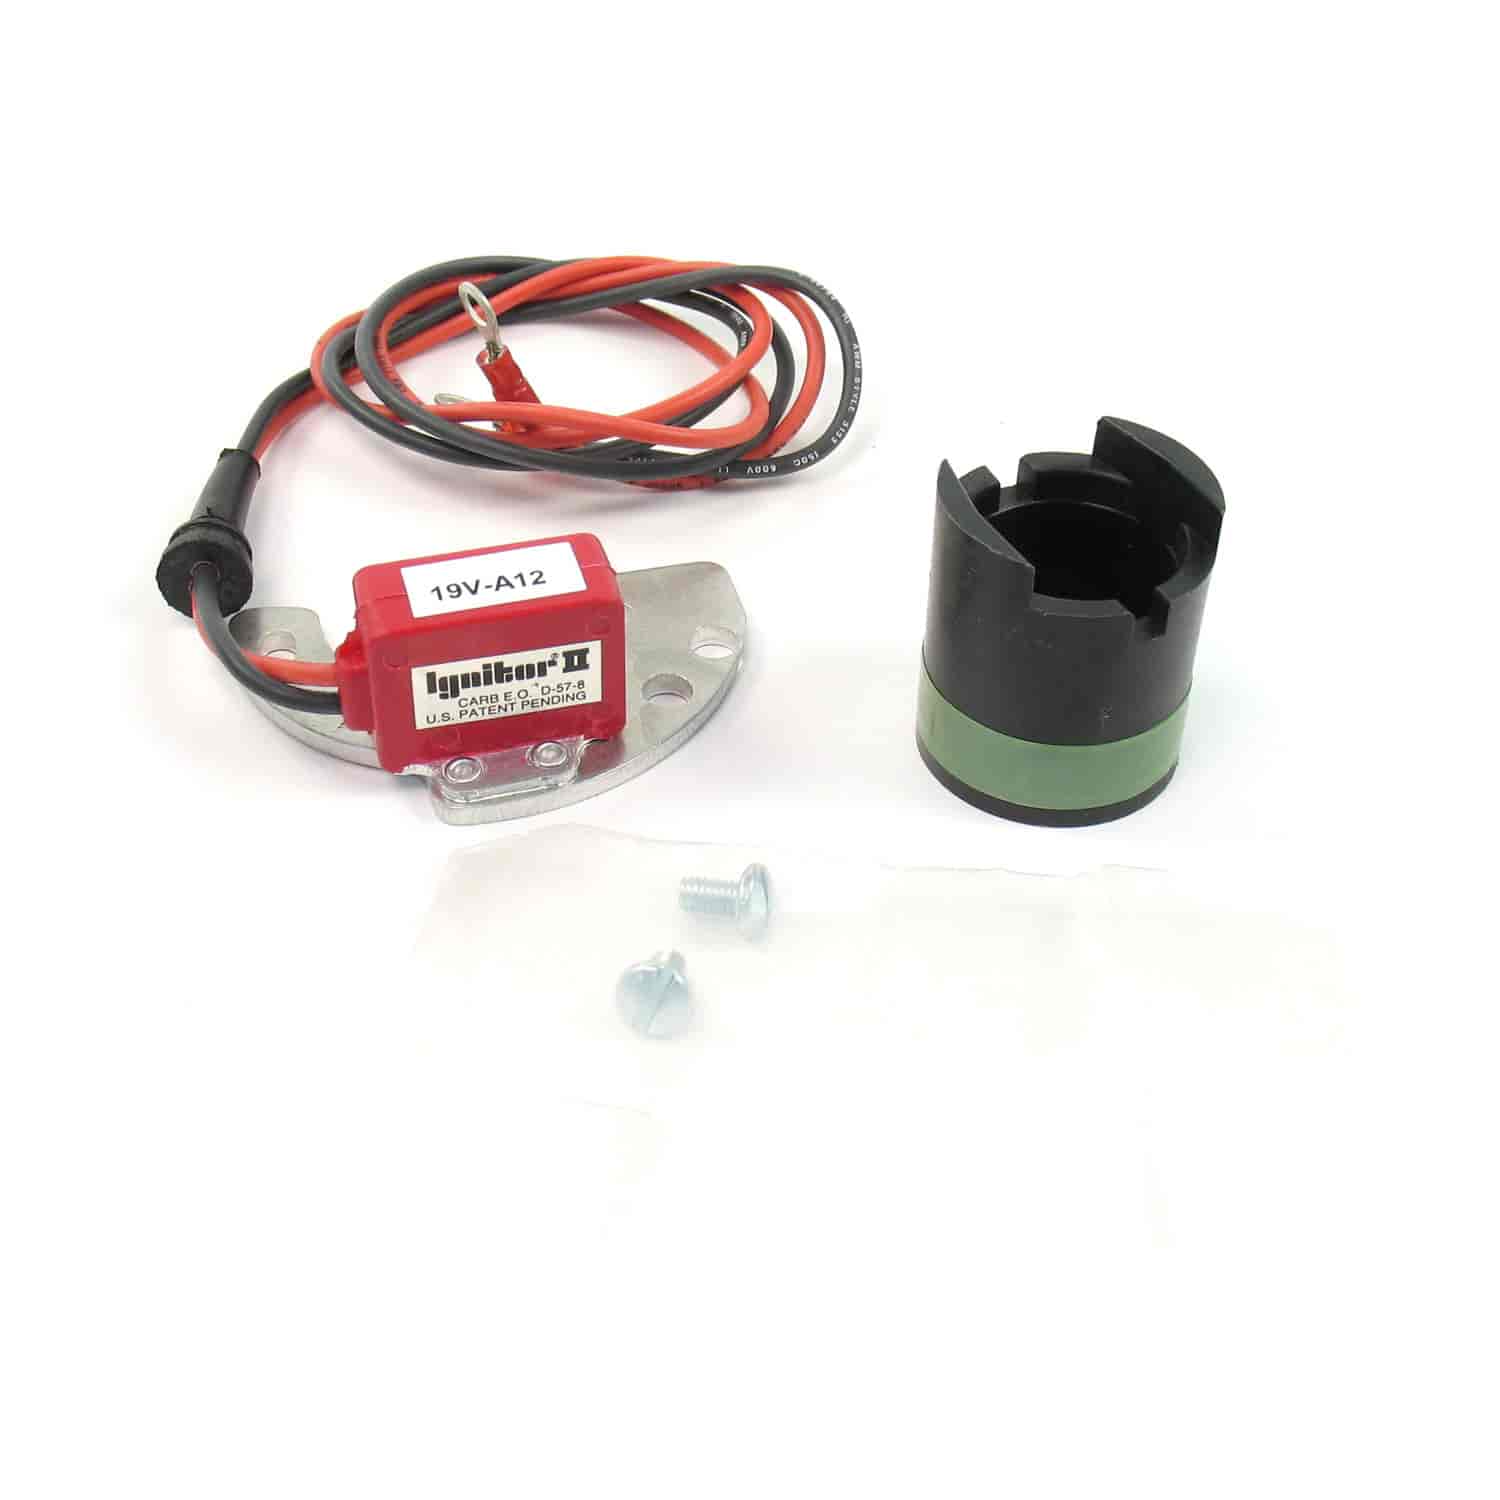 Ignition Ignitor II Holley (ccw) Carb Approved D-57-22